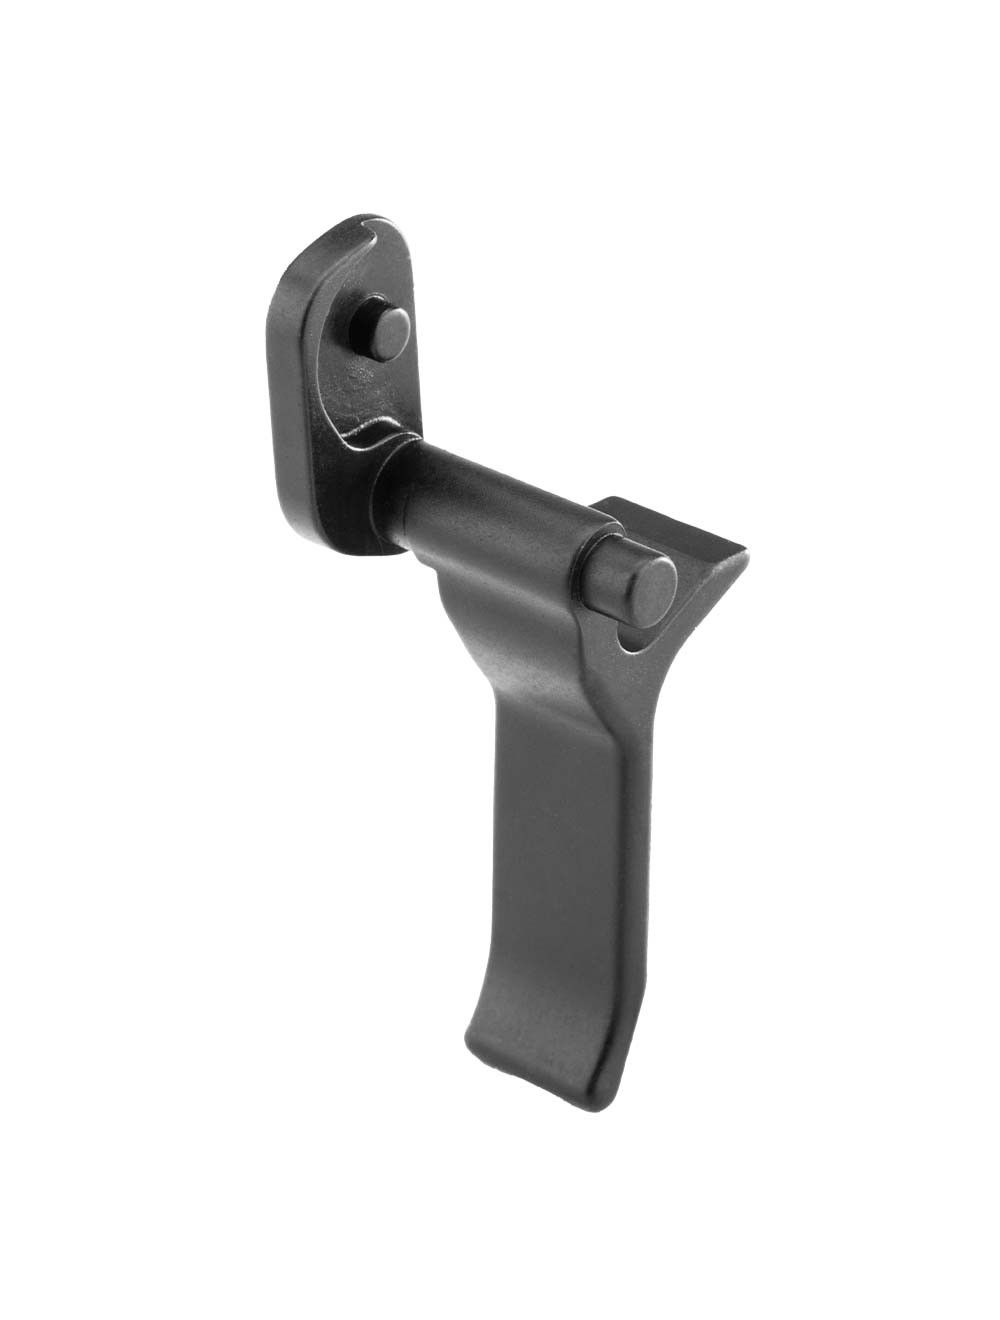 Flat and Curved Advanced Trigger for Sig P320